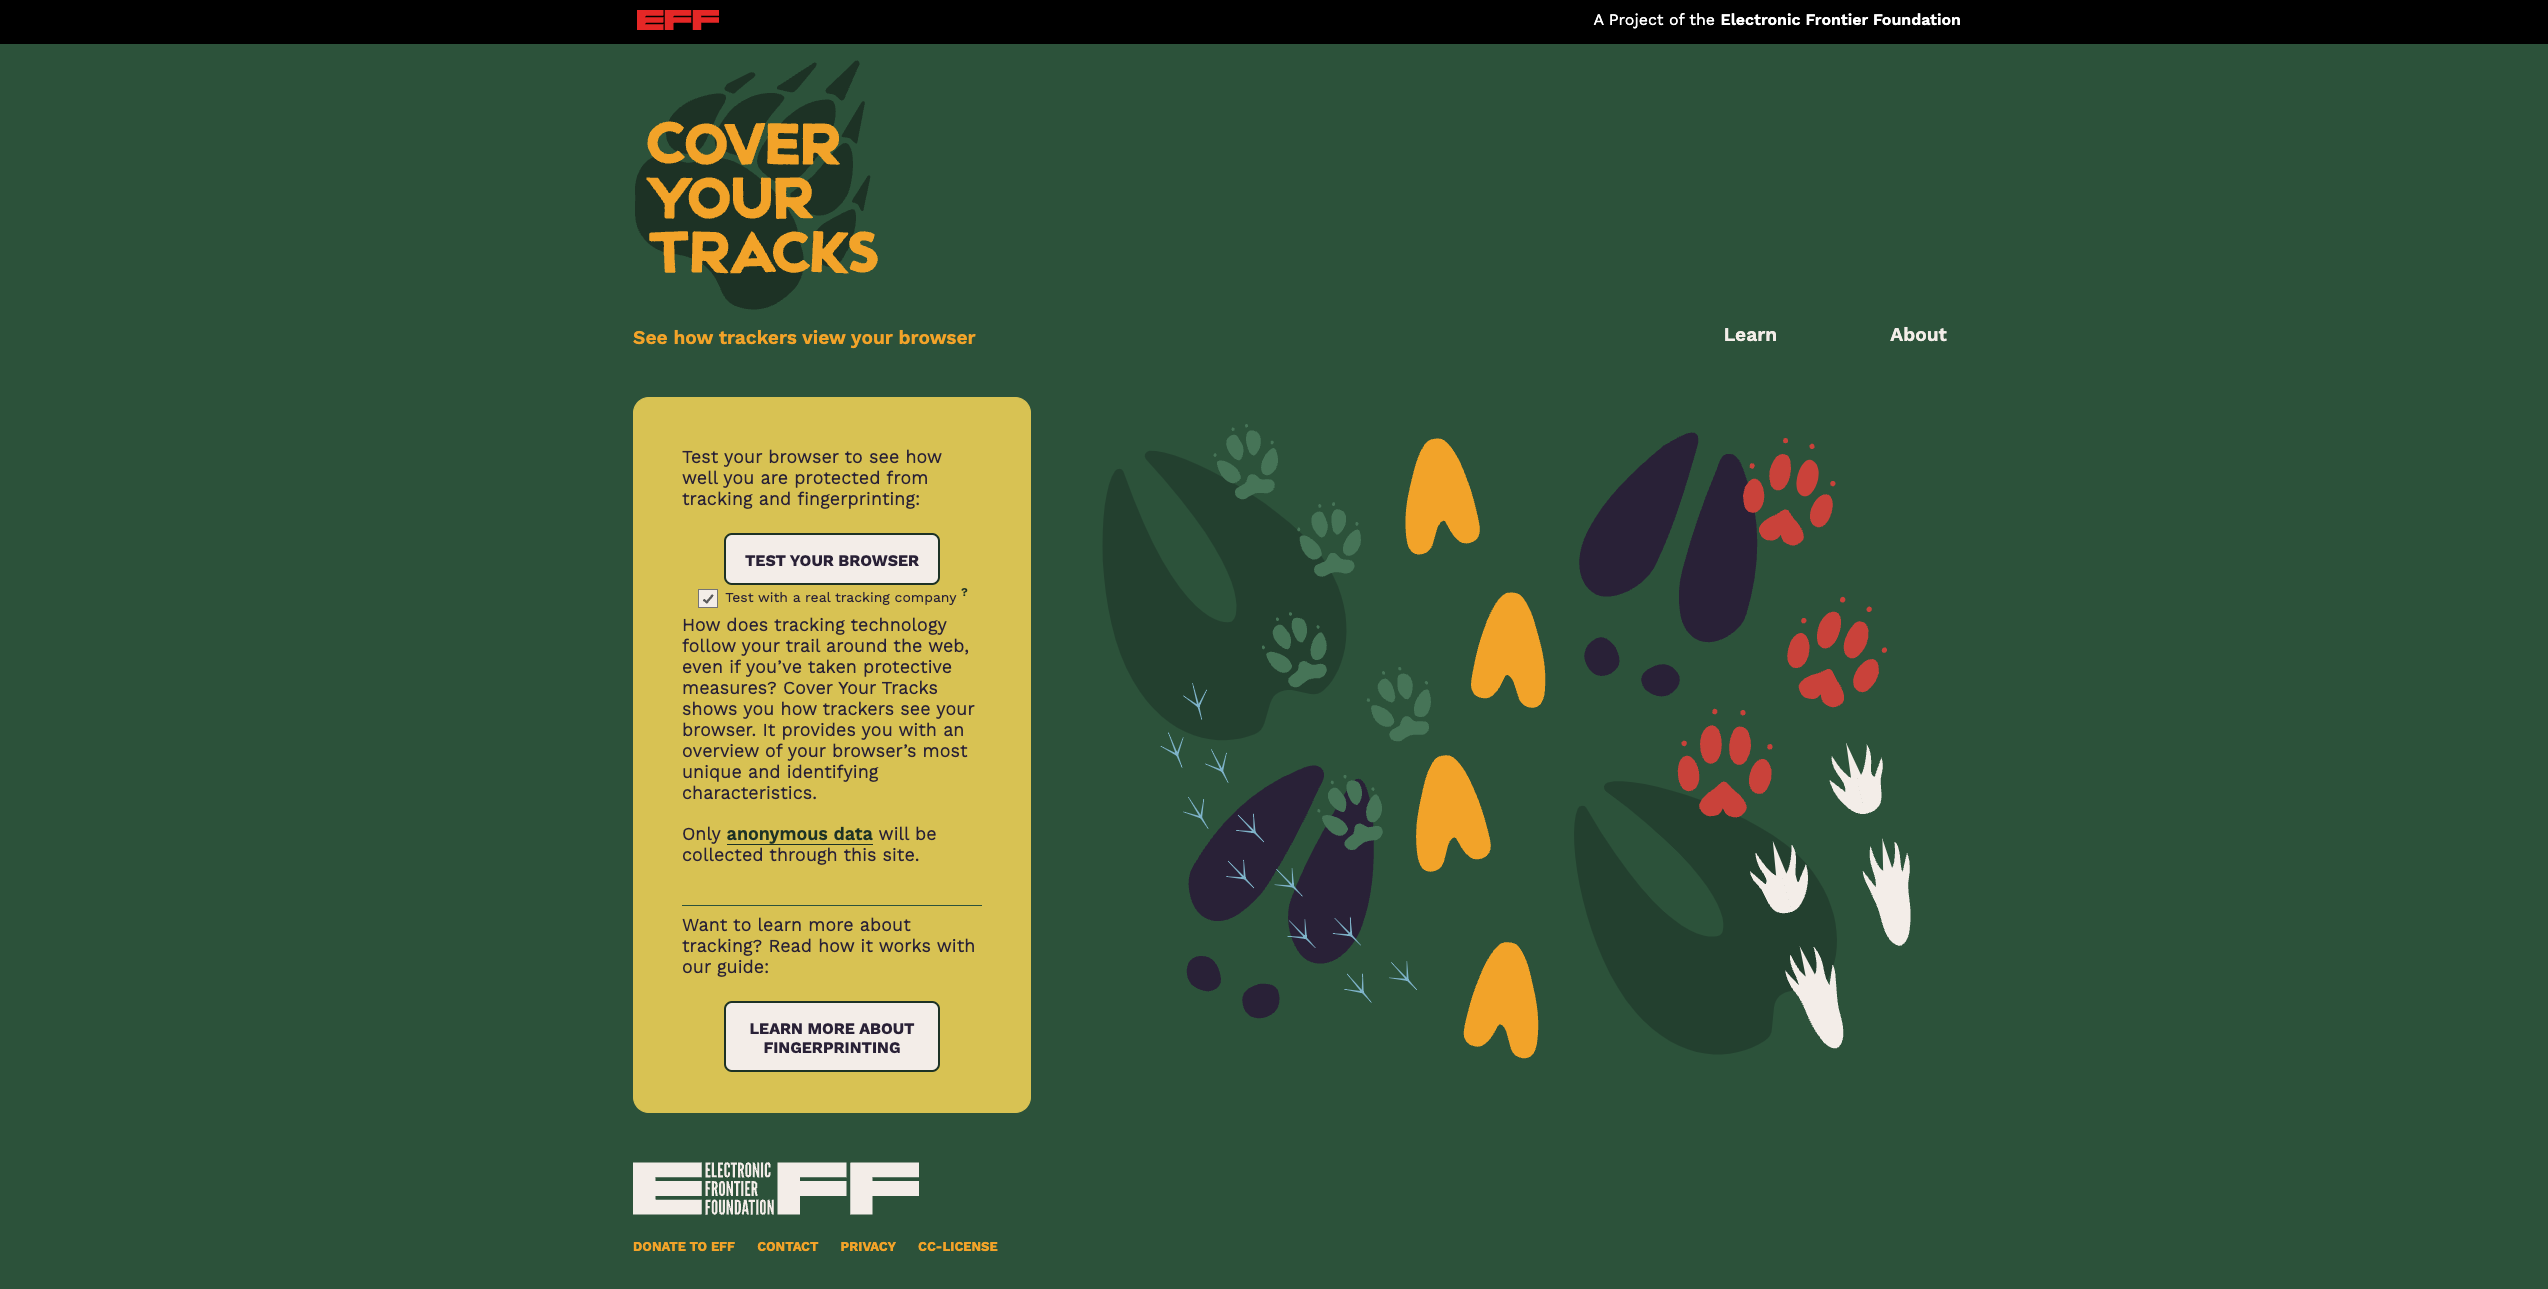 Cover Your Tracks, a project by the Electronic Frontier Foundation